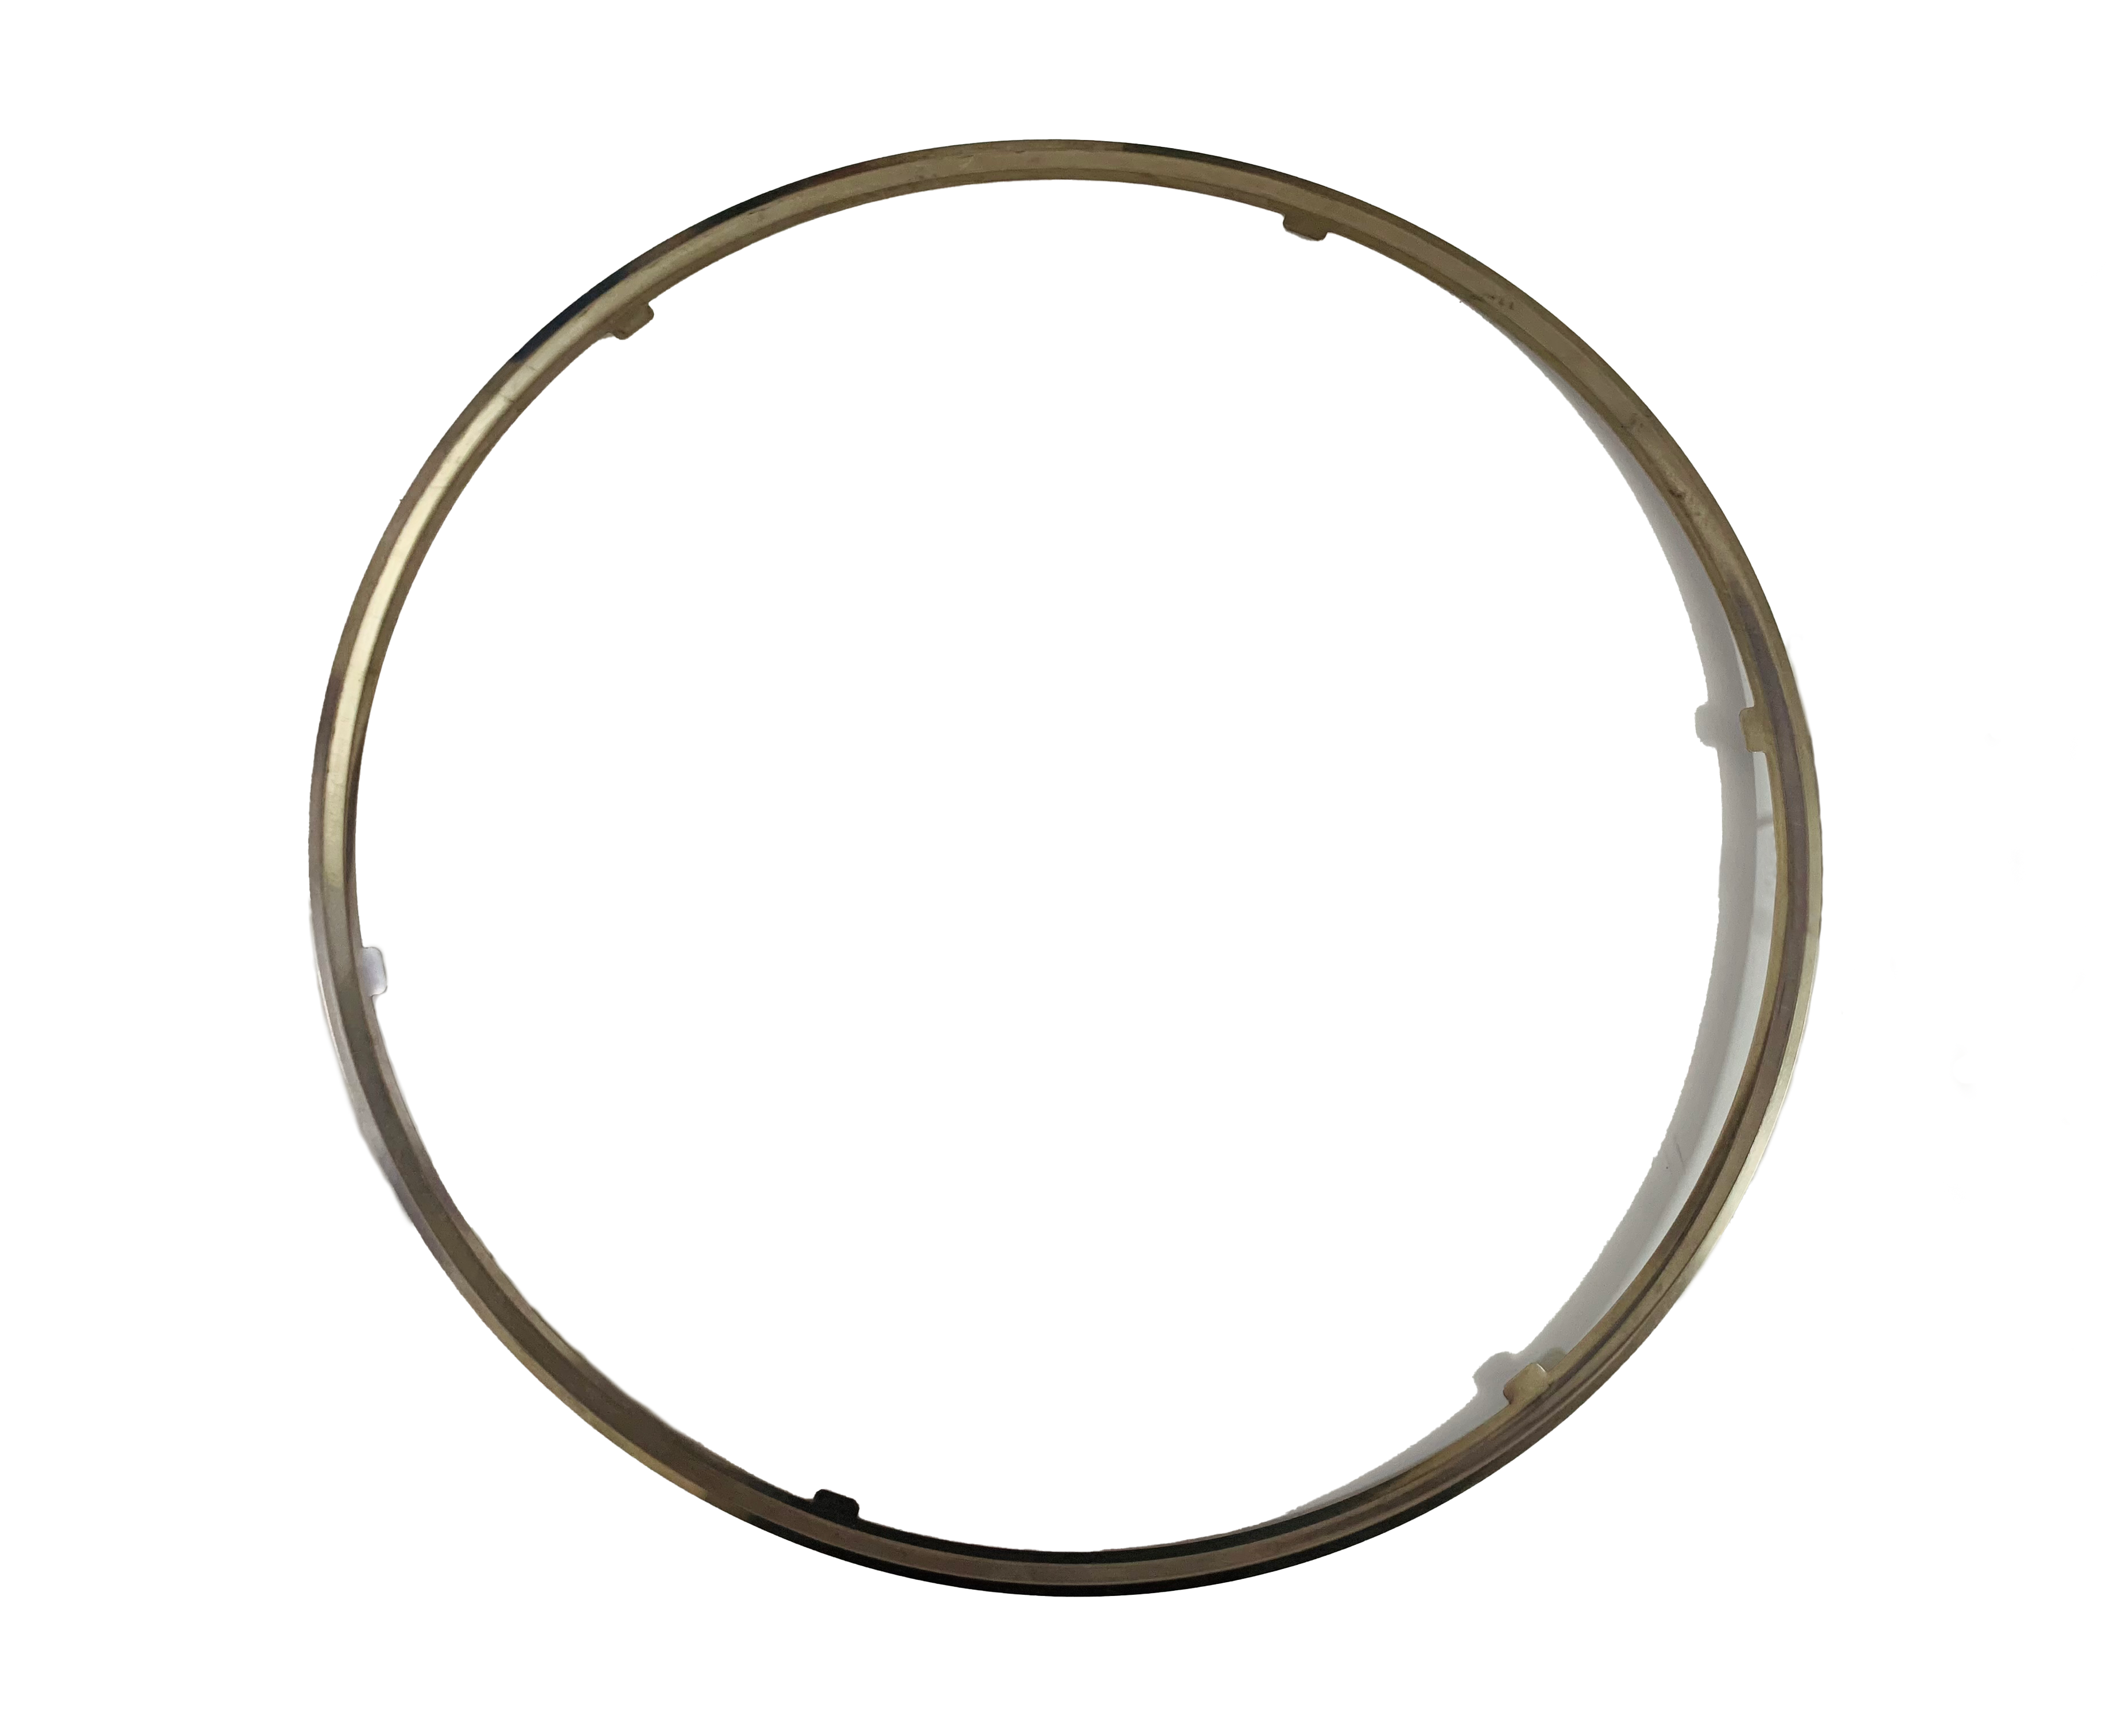 Catalytic Converter Gasket Kit and Exhaust Gasket for 2325403 81159010043 81159010044 21570880 7421570880 4911580 A0004911580